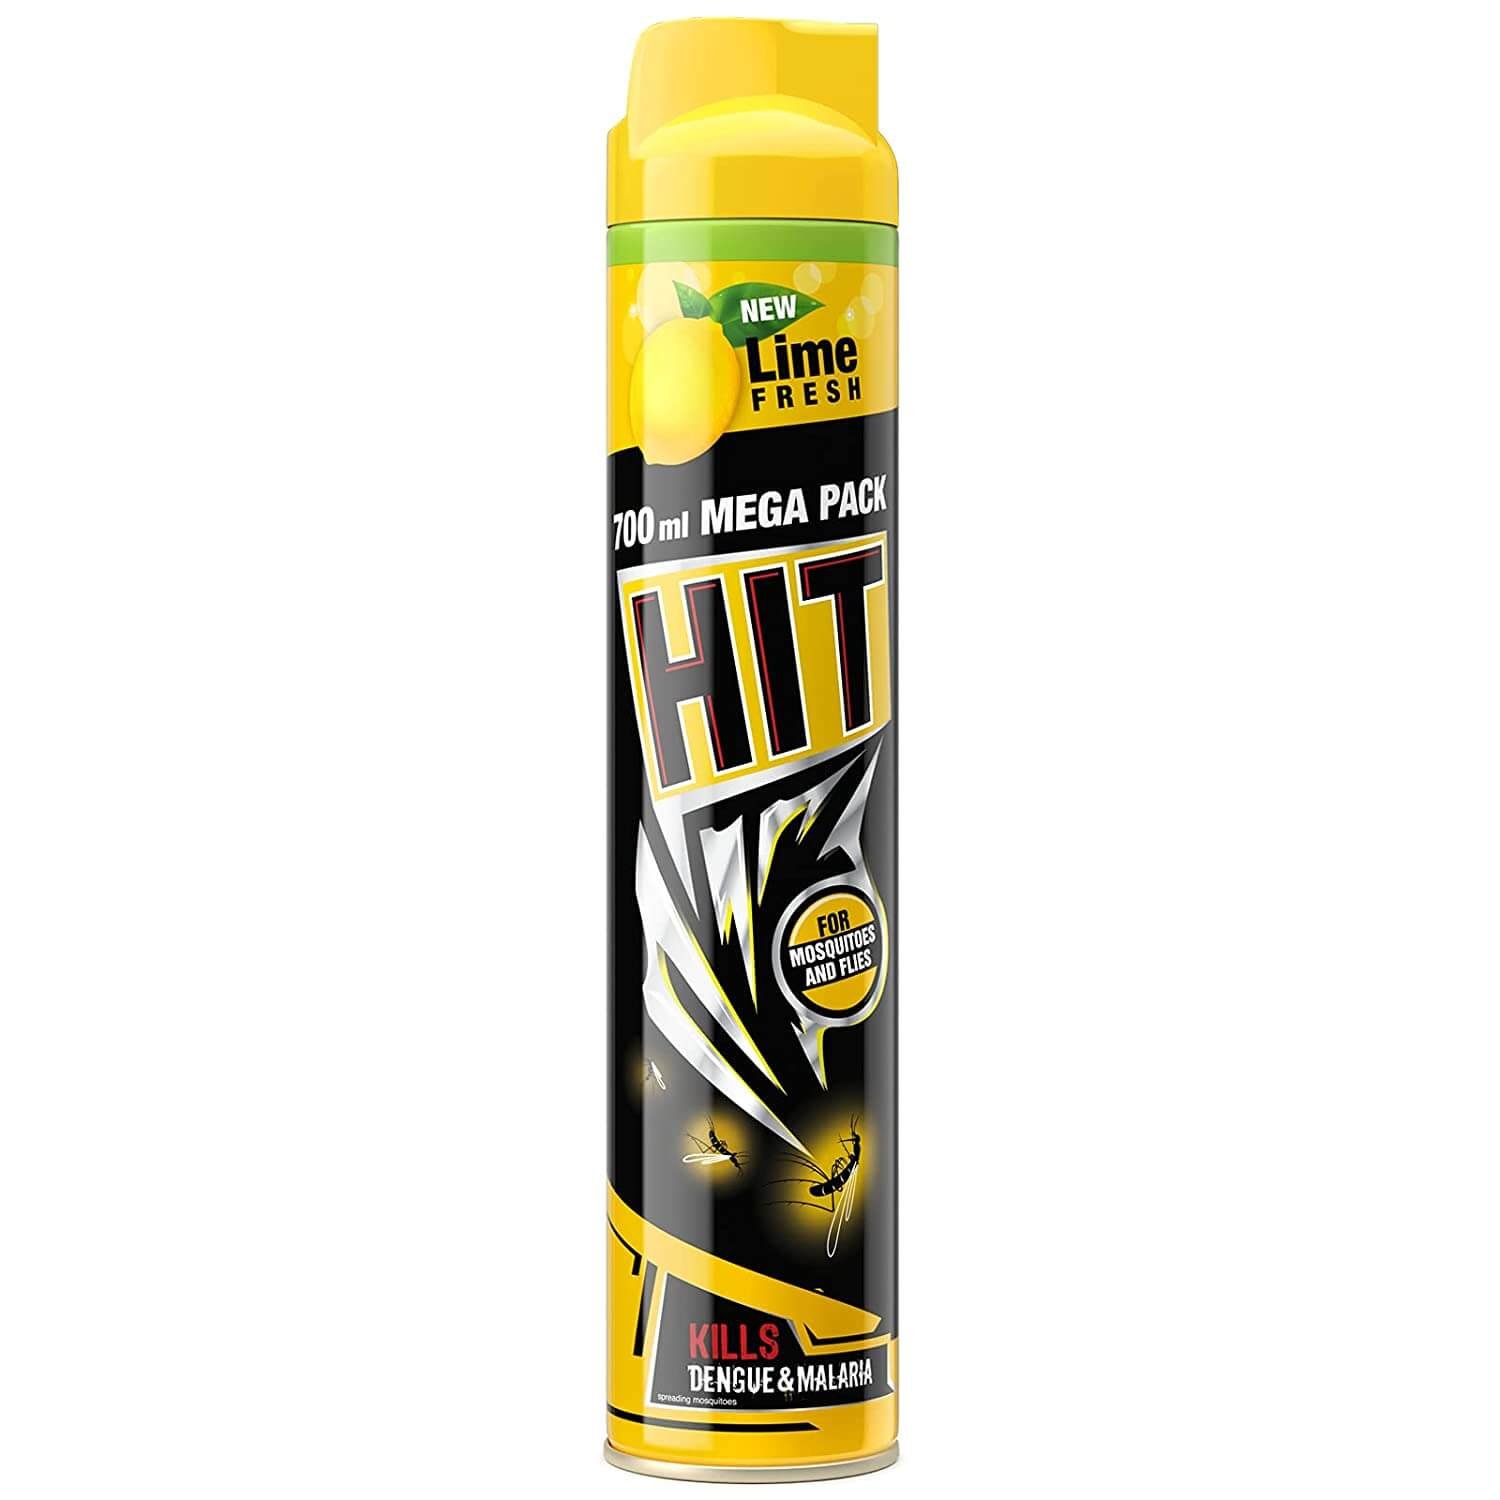 HIT Spray, Flying Insect Killer, Lime Fragrance (700ml) Mosquito & Fly Killer Spray, Instant Kill, Deep-Reach Nozzle